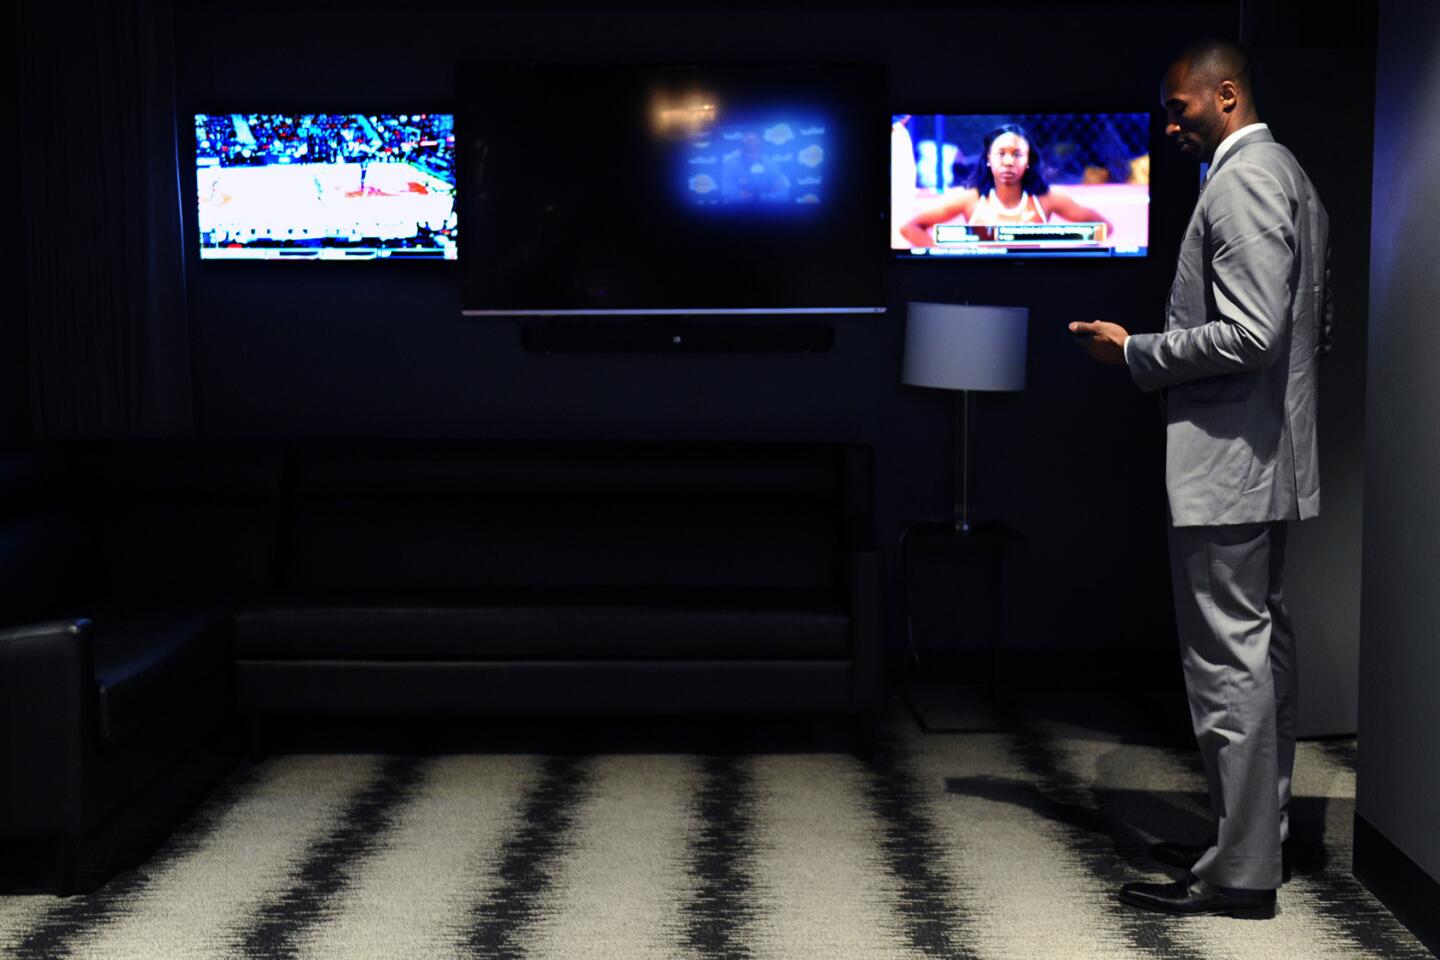 Lakers Kobe Bryant looks at his phone as he waits for guests in a private room before a game with the Knicks at the Staples Center.